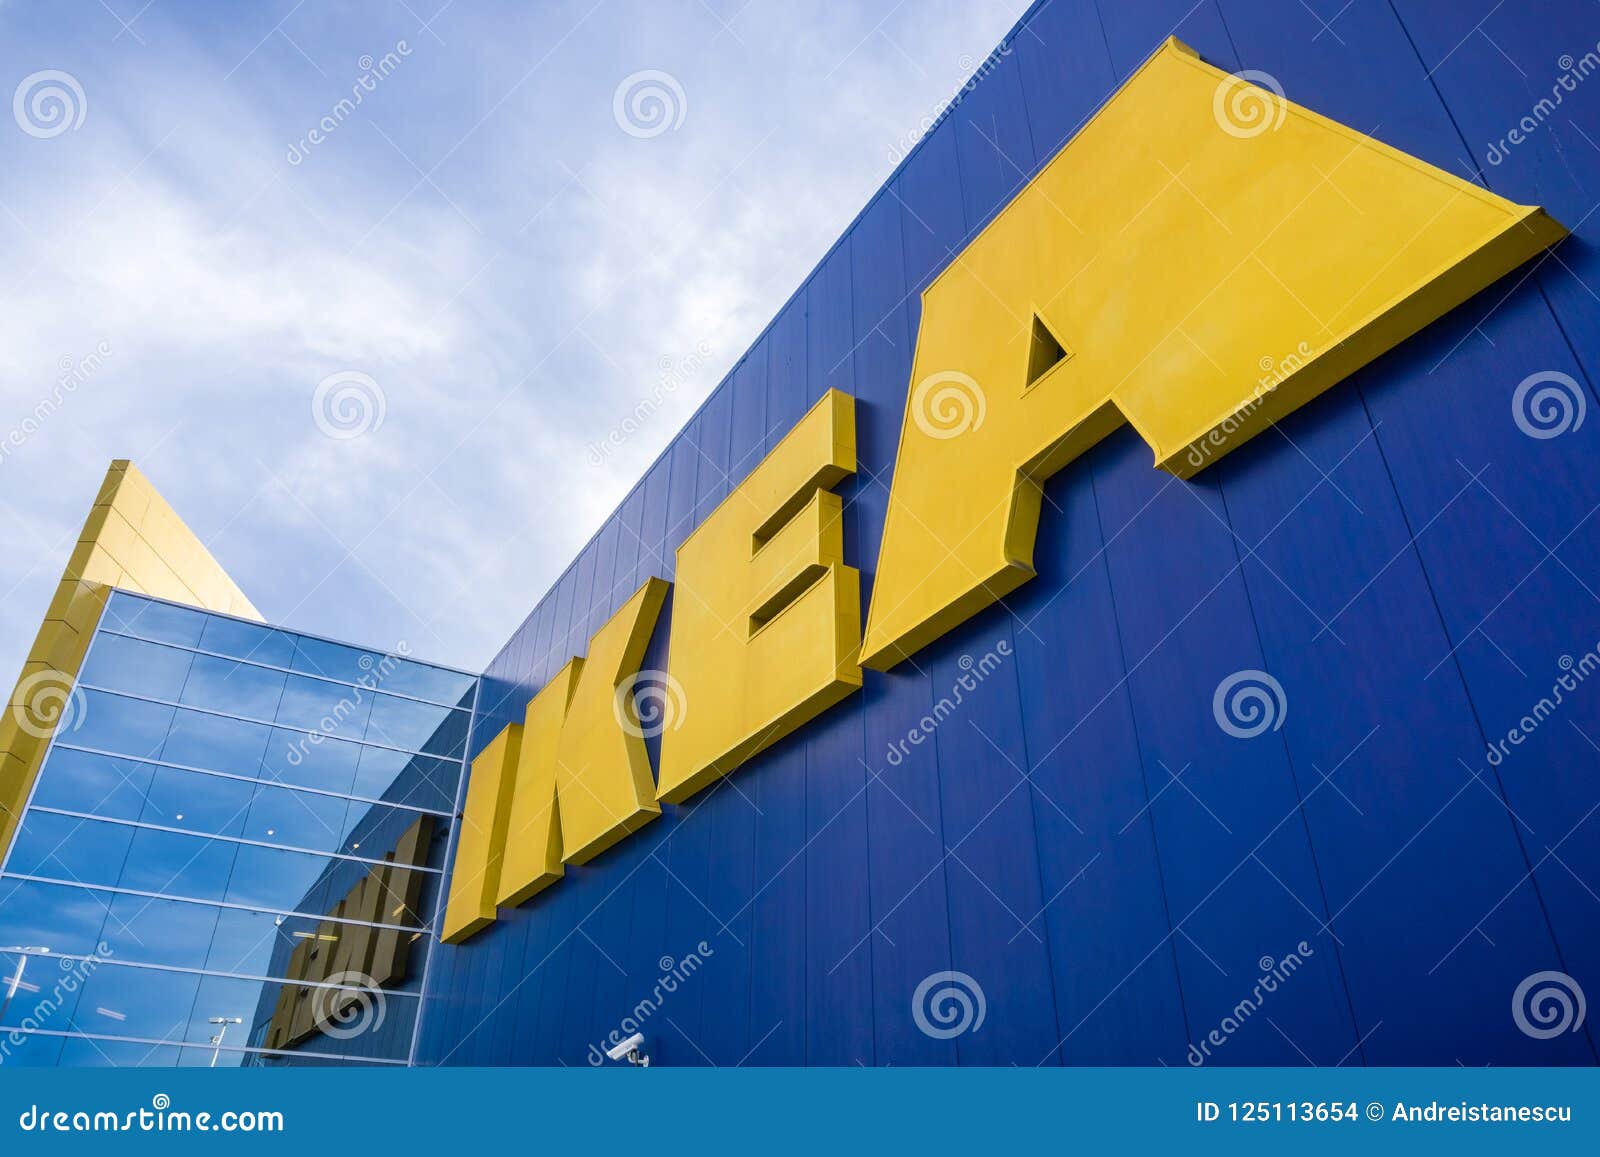 IKEA editorial stock image. Image of business - 125113654